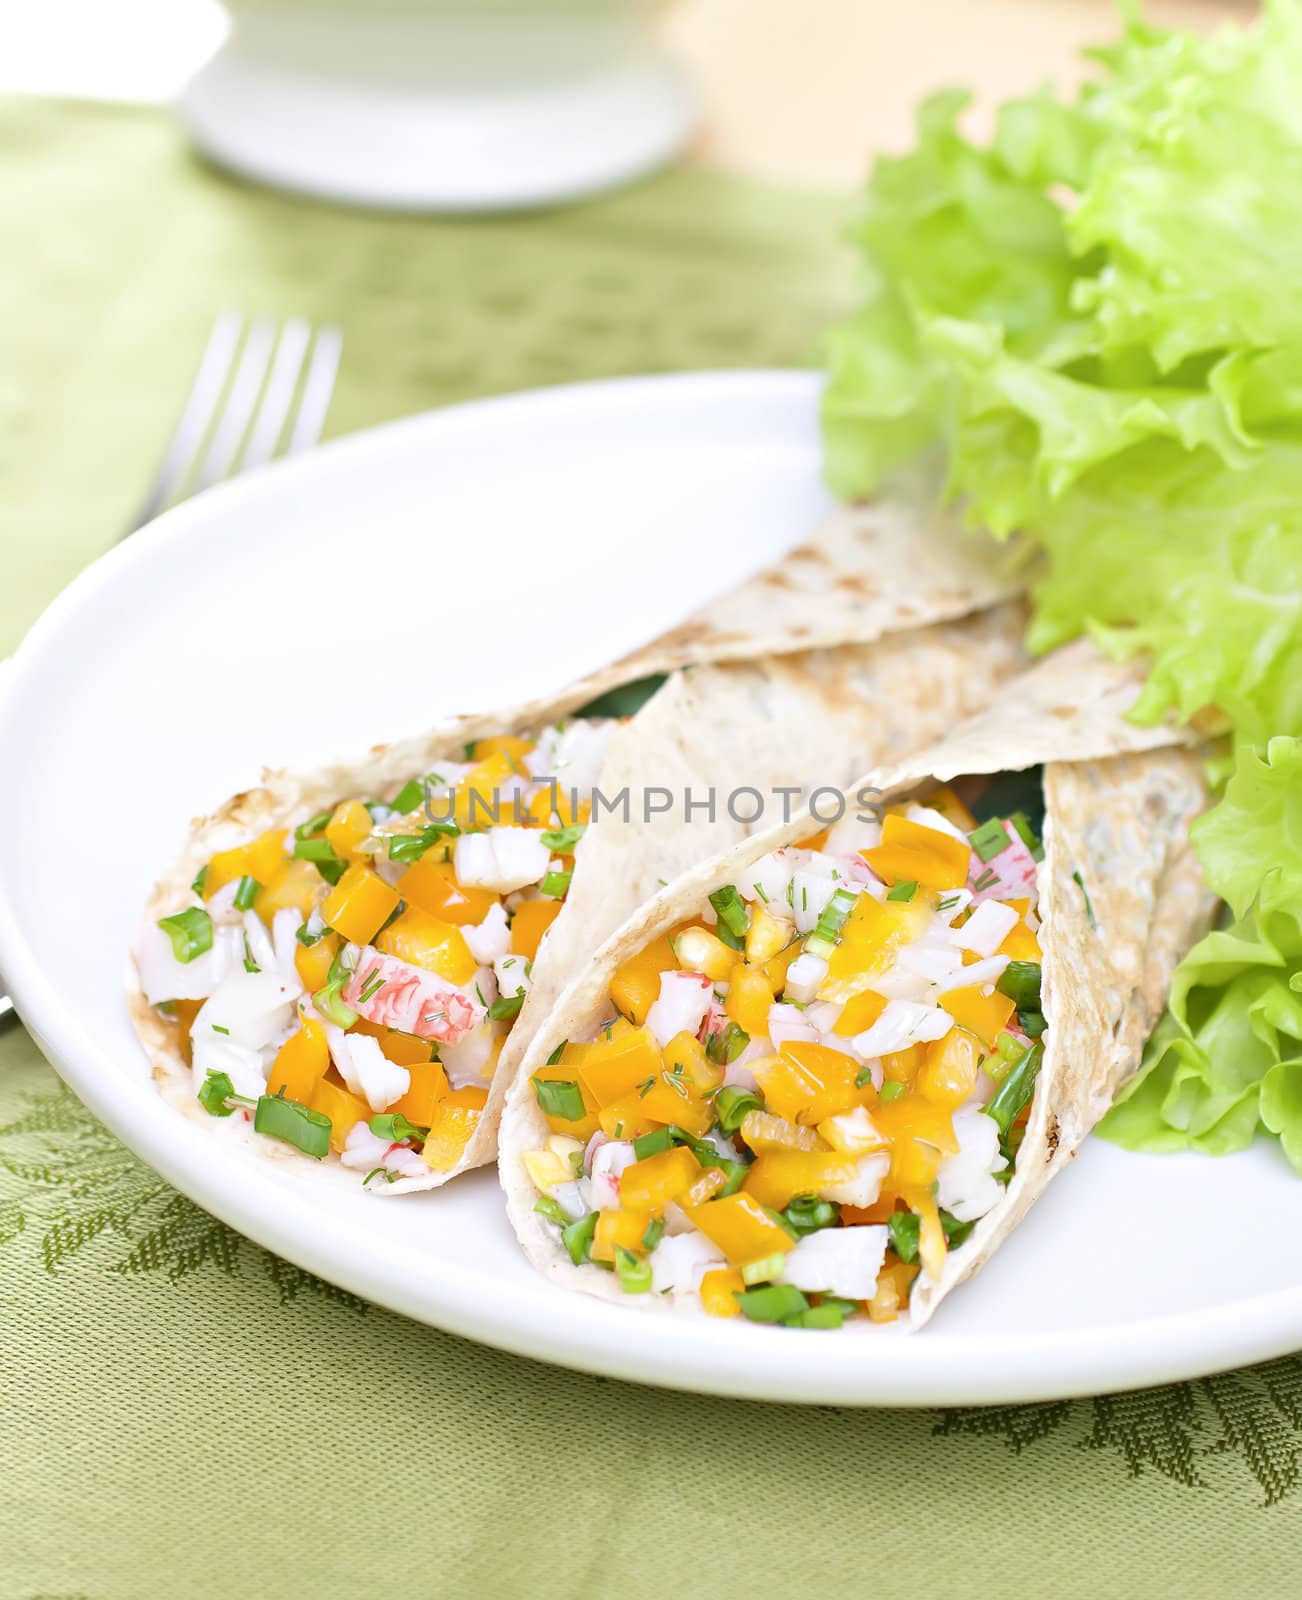 Served wheat wraps filled with salad and crab meat.